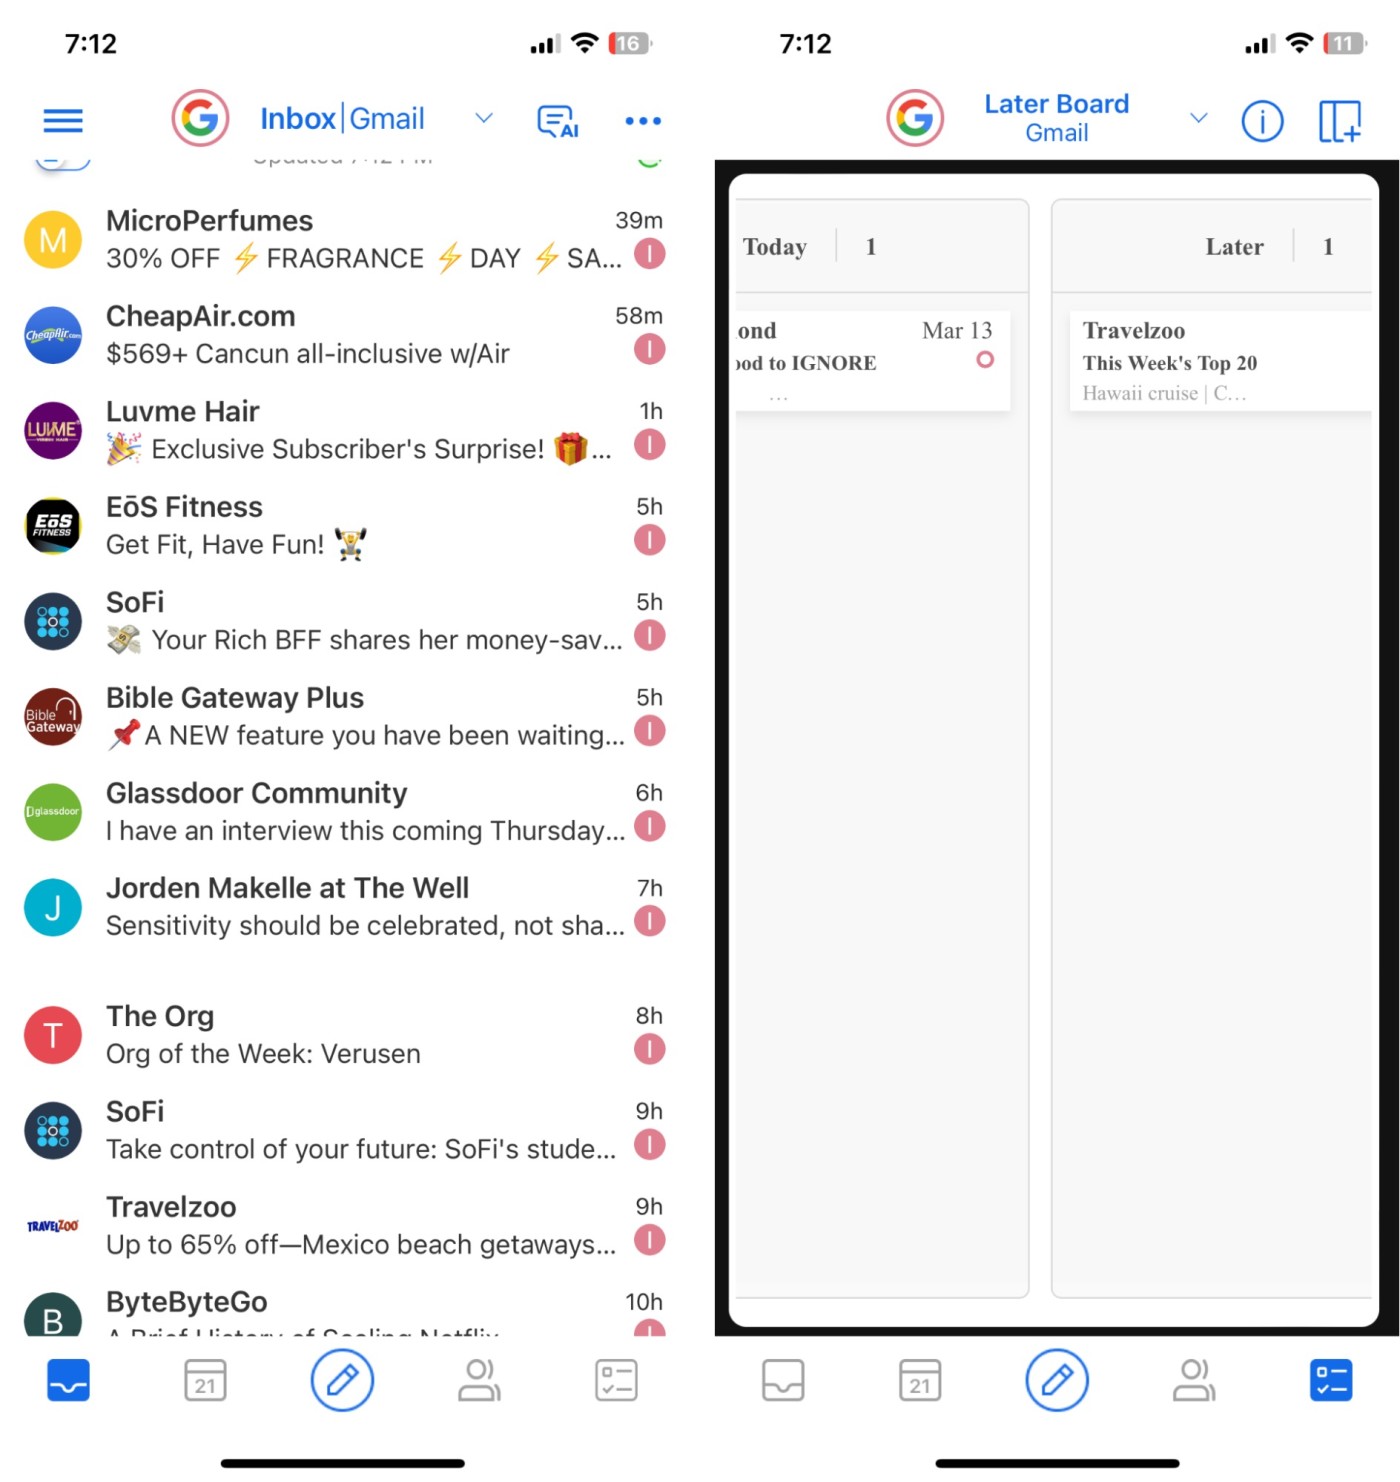 BlueMail, our pick for the best iPhone email app for organization